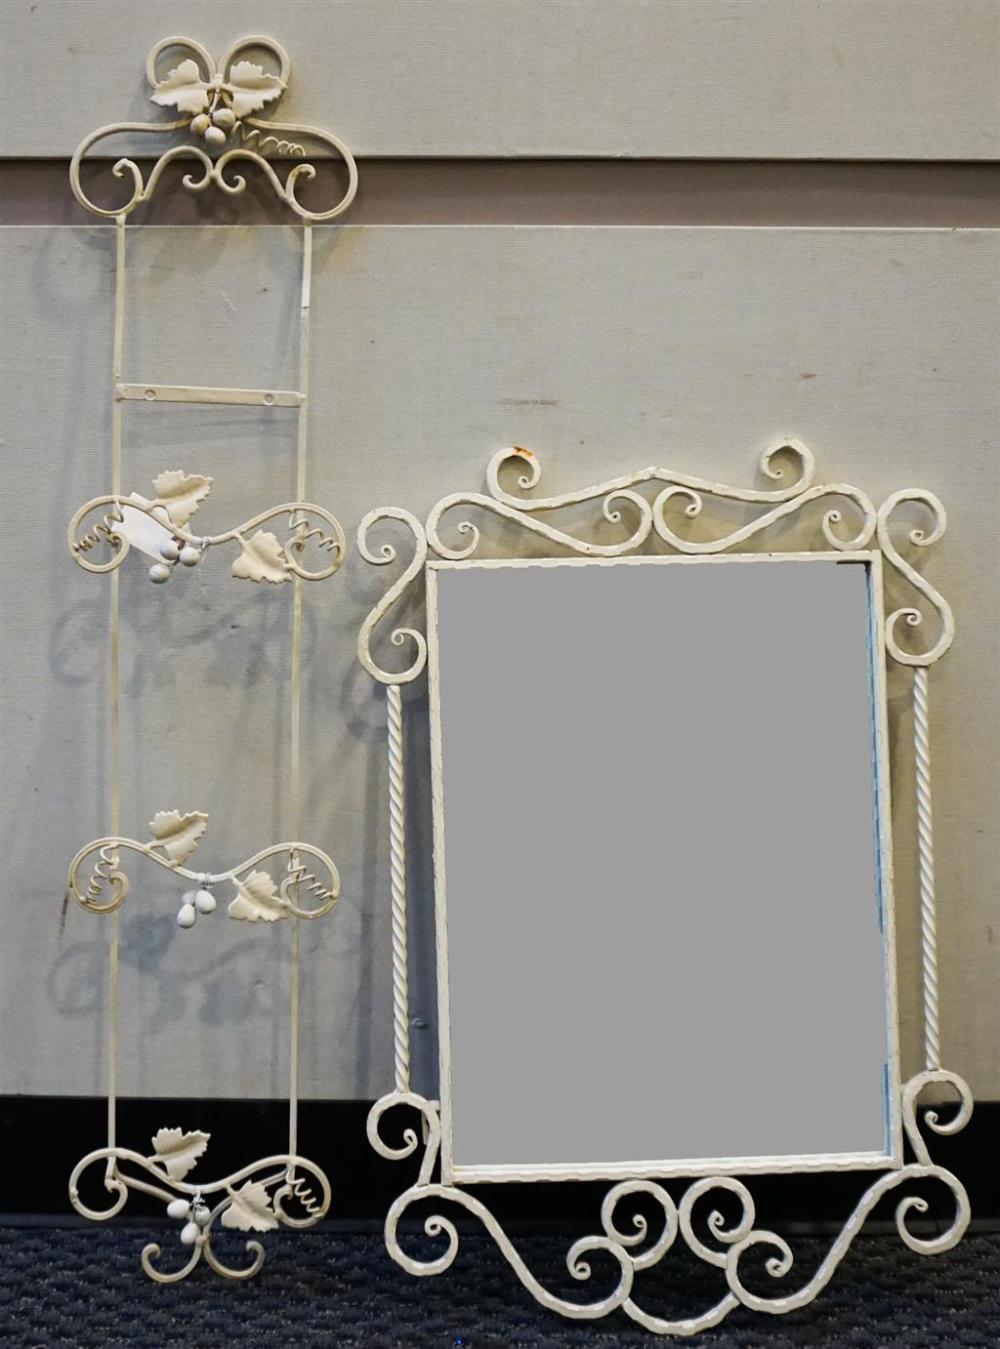 WHITE PAINTED WROUGHT-IRON FRAME